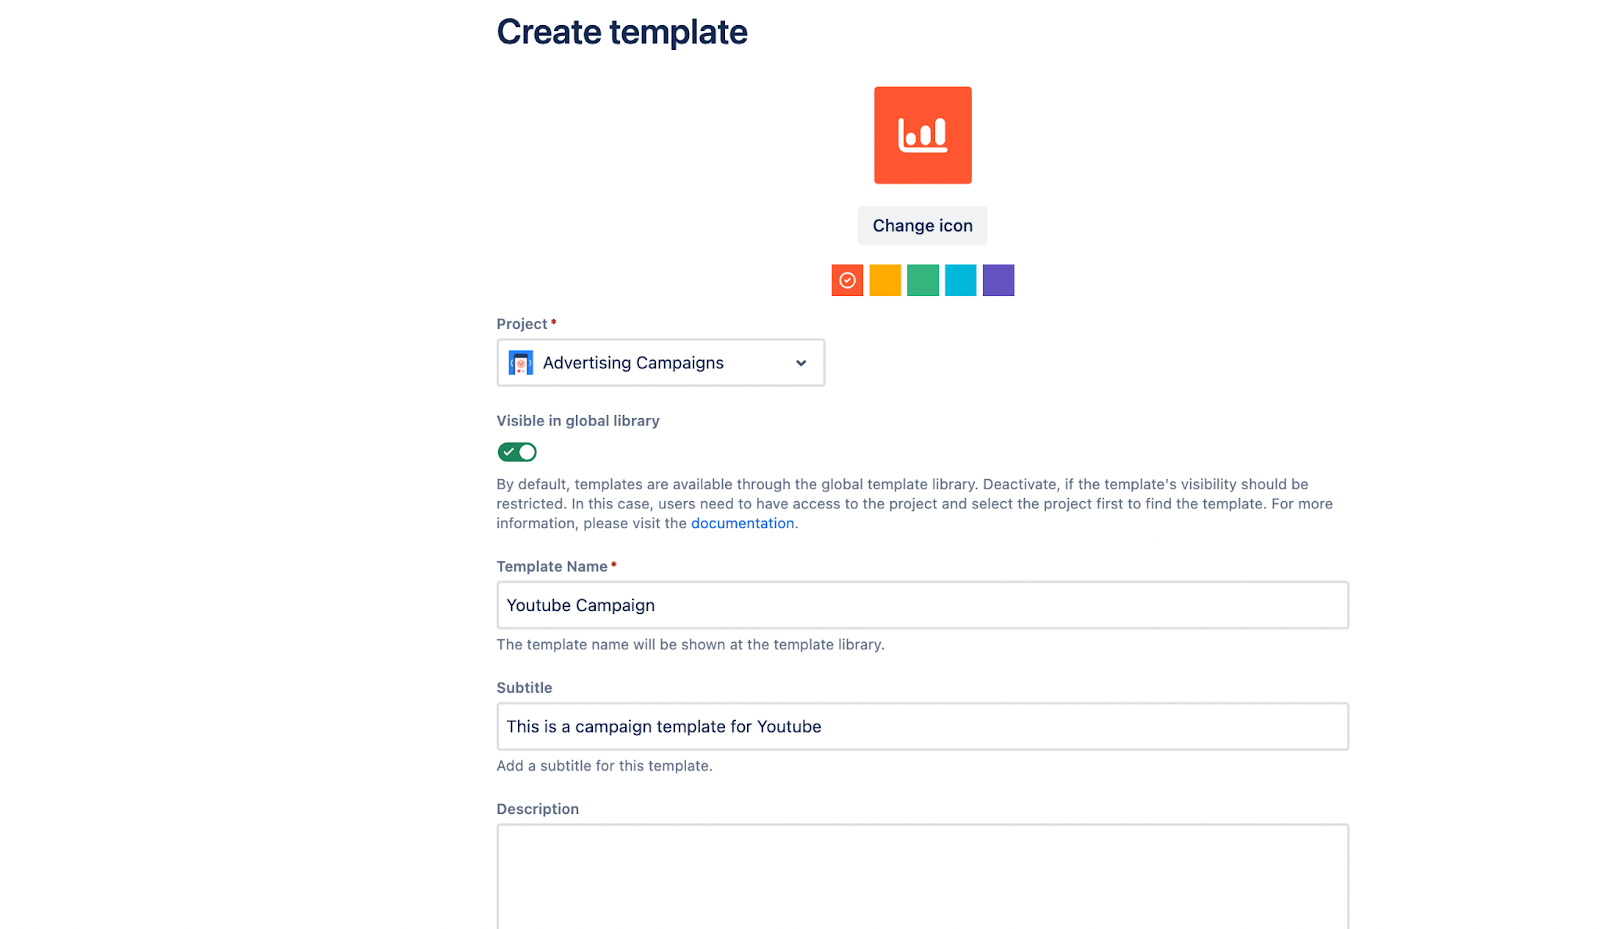 Templating.app - Standard approach to creating (social) media - creating a new template with templating.app